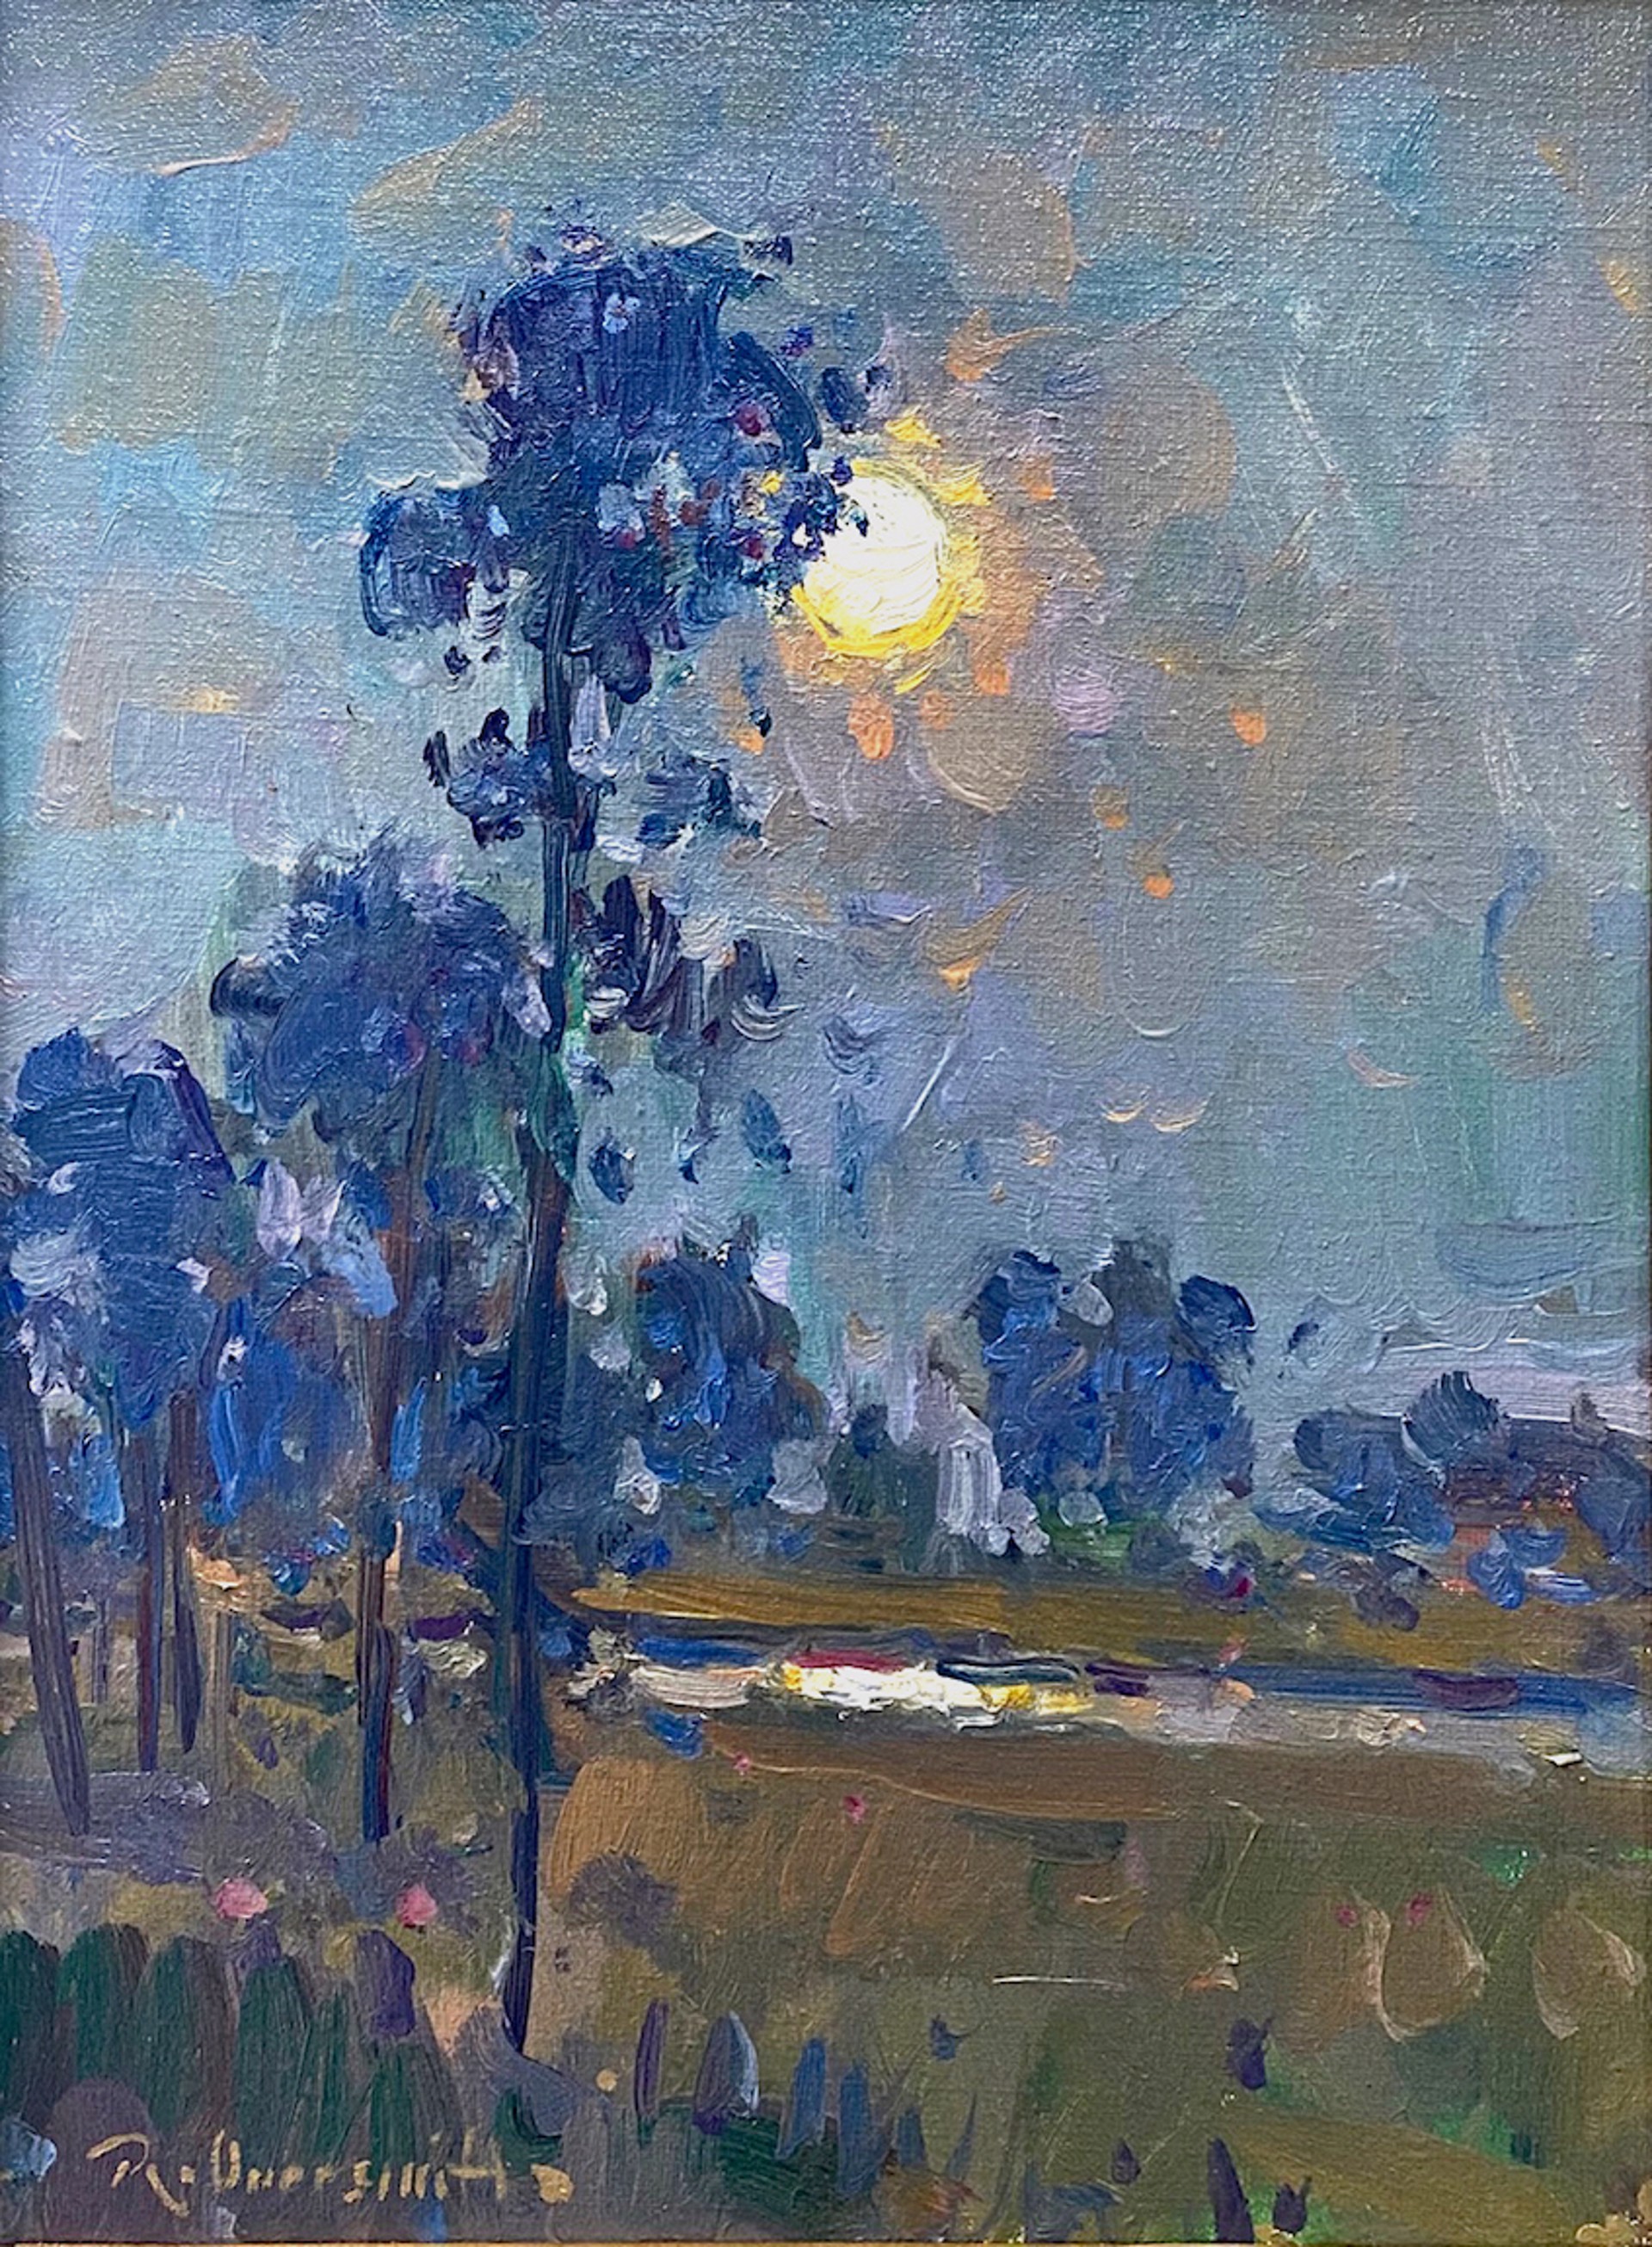 Lowcountry Moon by Richard Oversmith